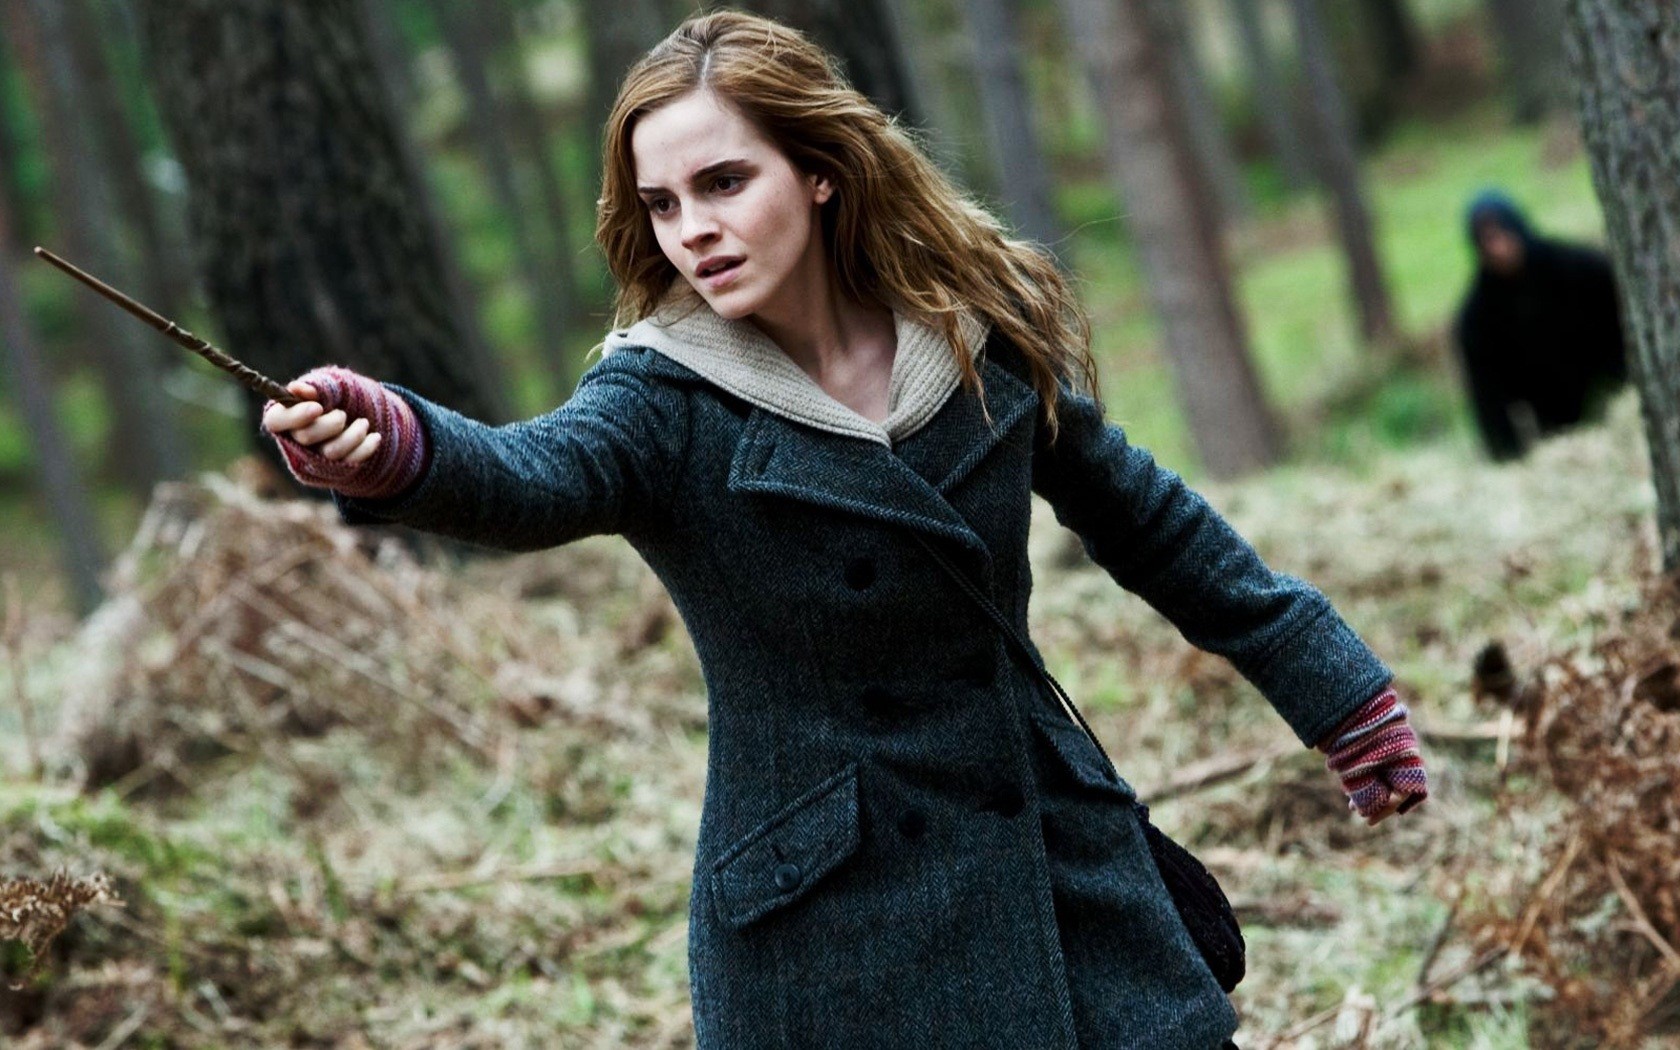 Emma Watson Hermione Granger Harry Potter And The Deathly Hallows Movies Harry Potter Actress Women  1680x1050